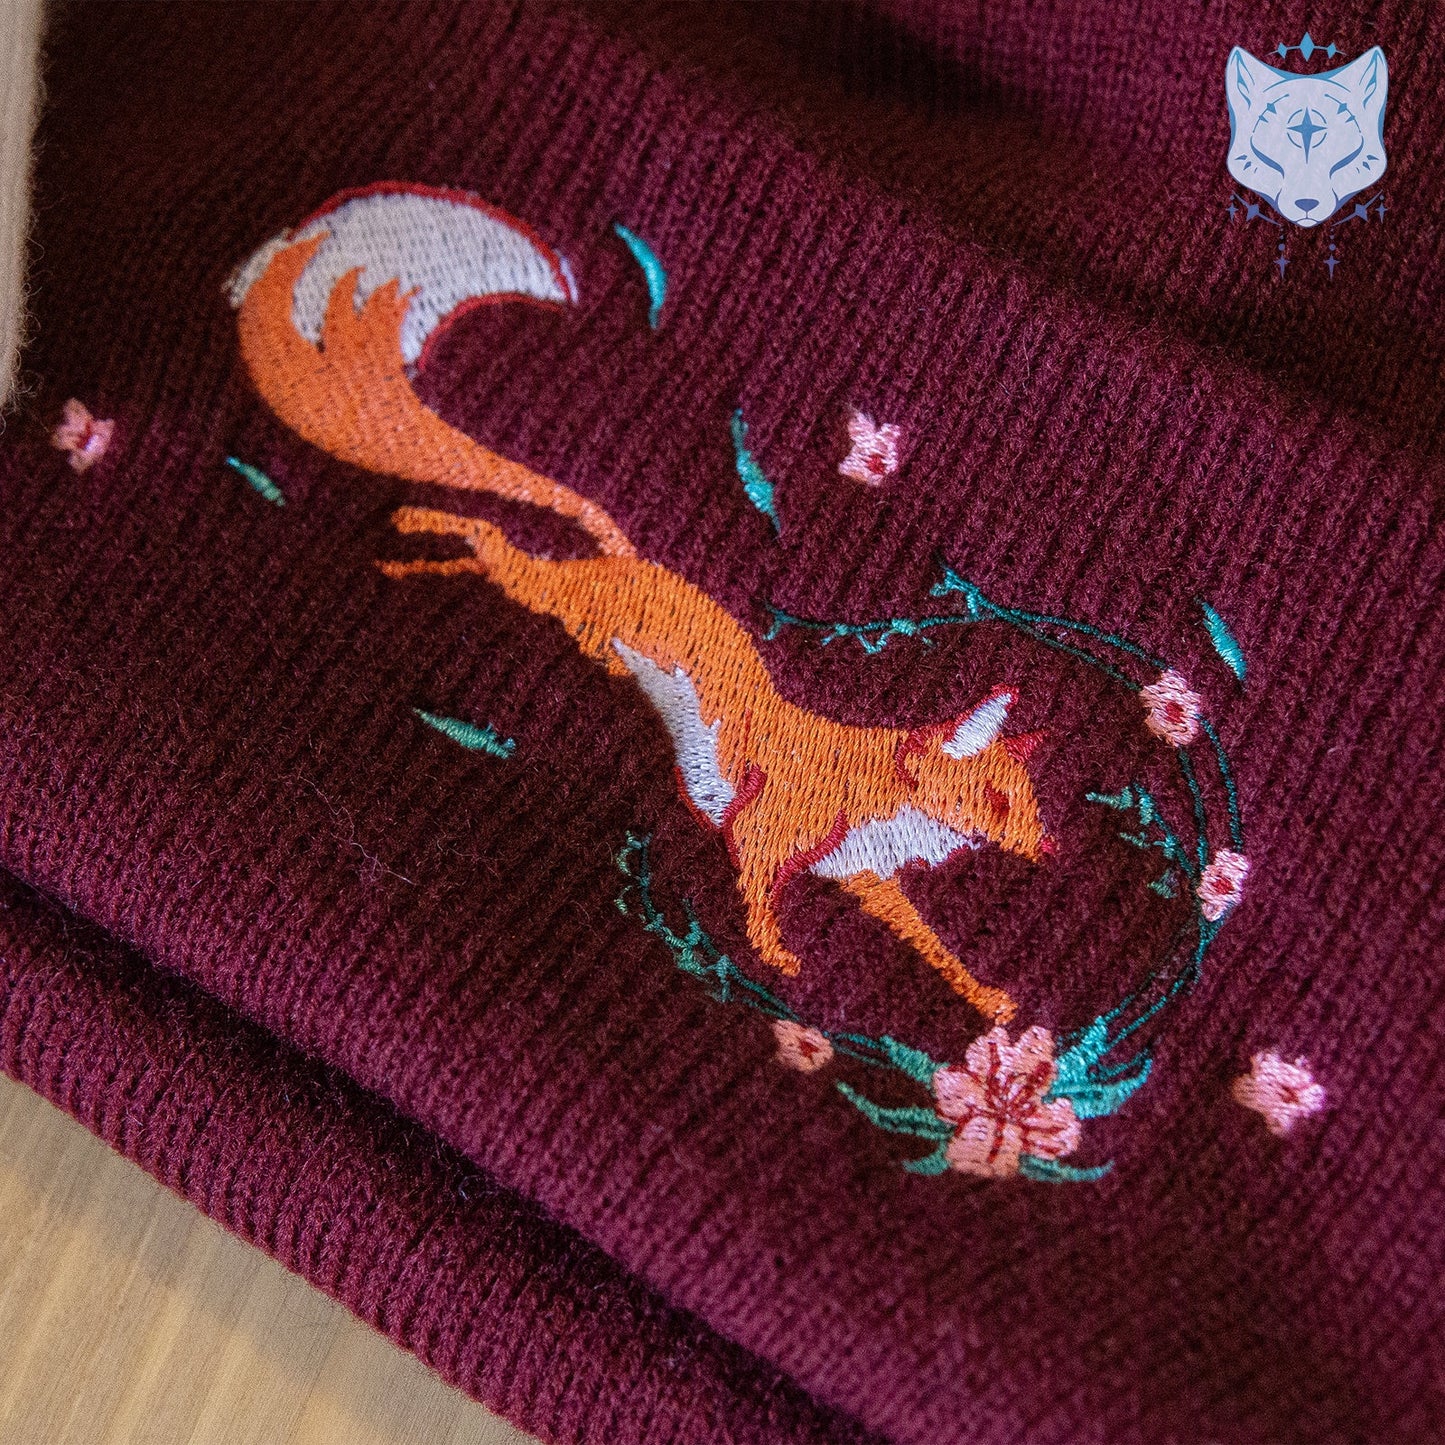 Spring Fox Beanie - Bobble hat beanie available in dark red or white